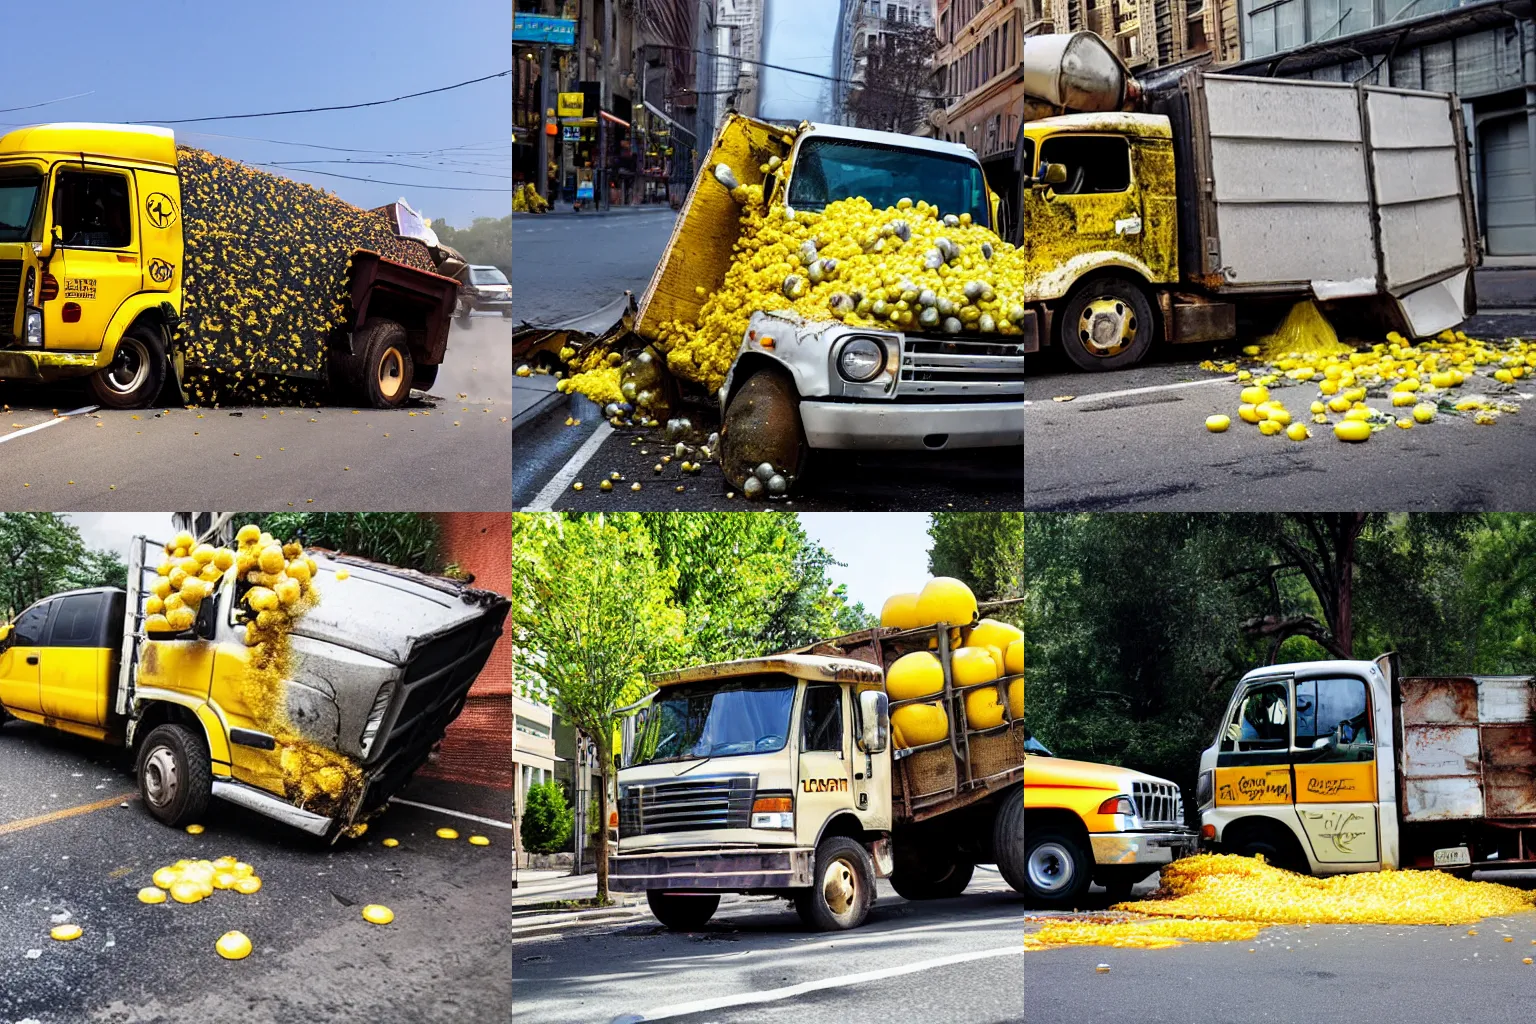 Prompt: a crashed truck with lemons, spilling lemons all over the street, outdoors